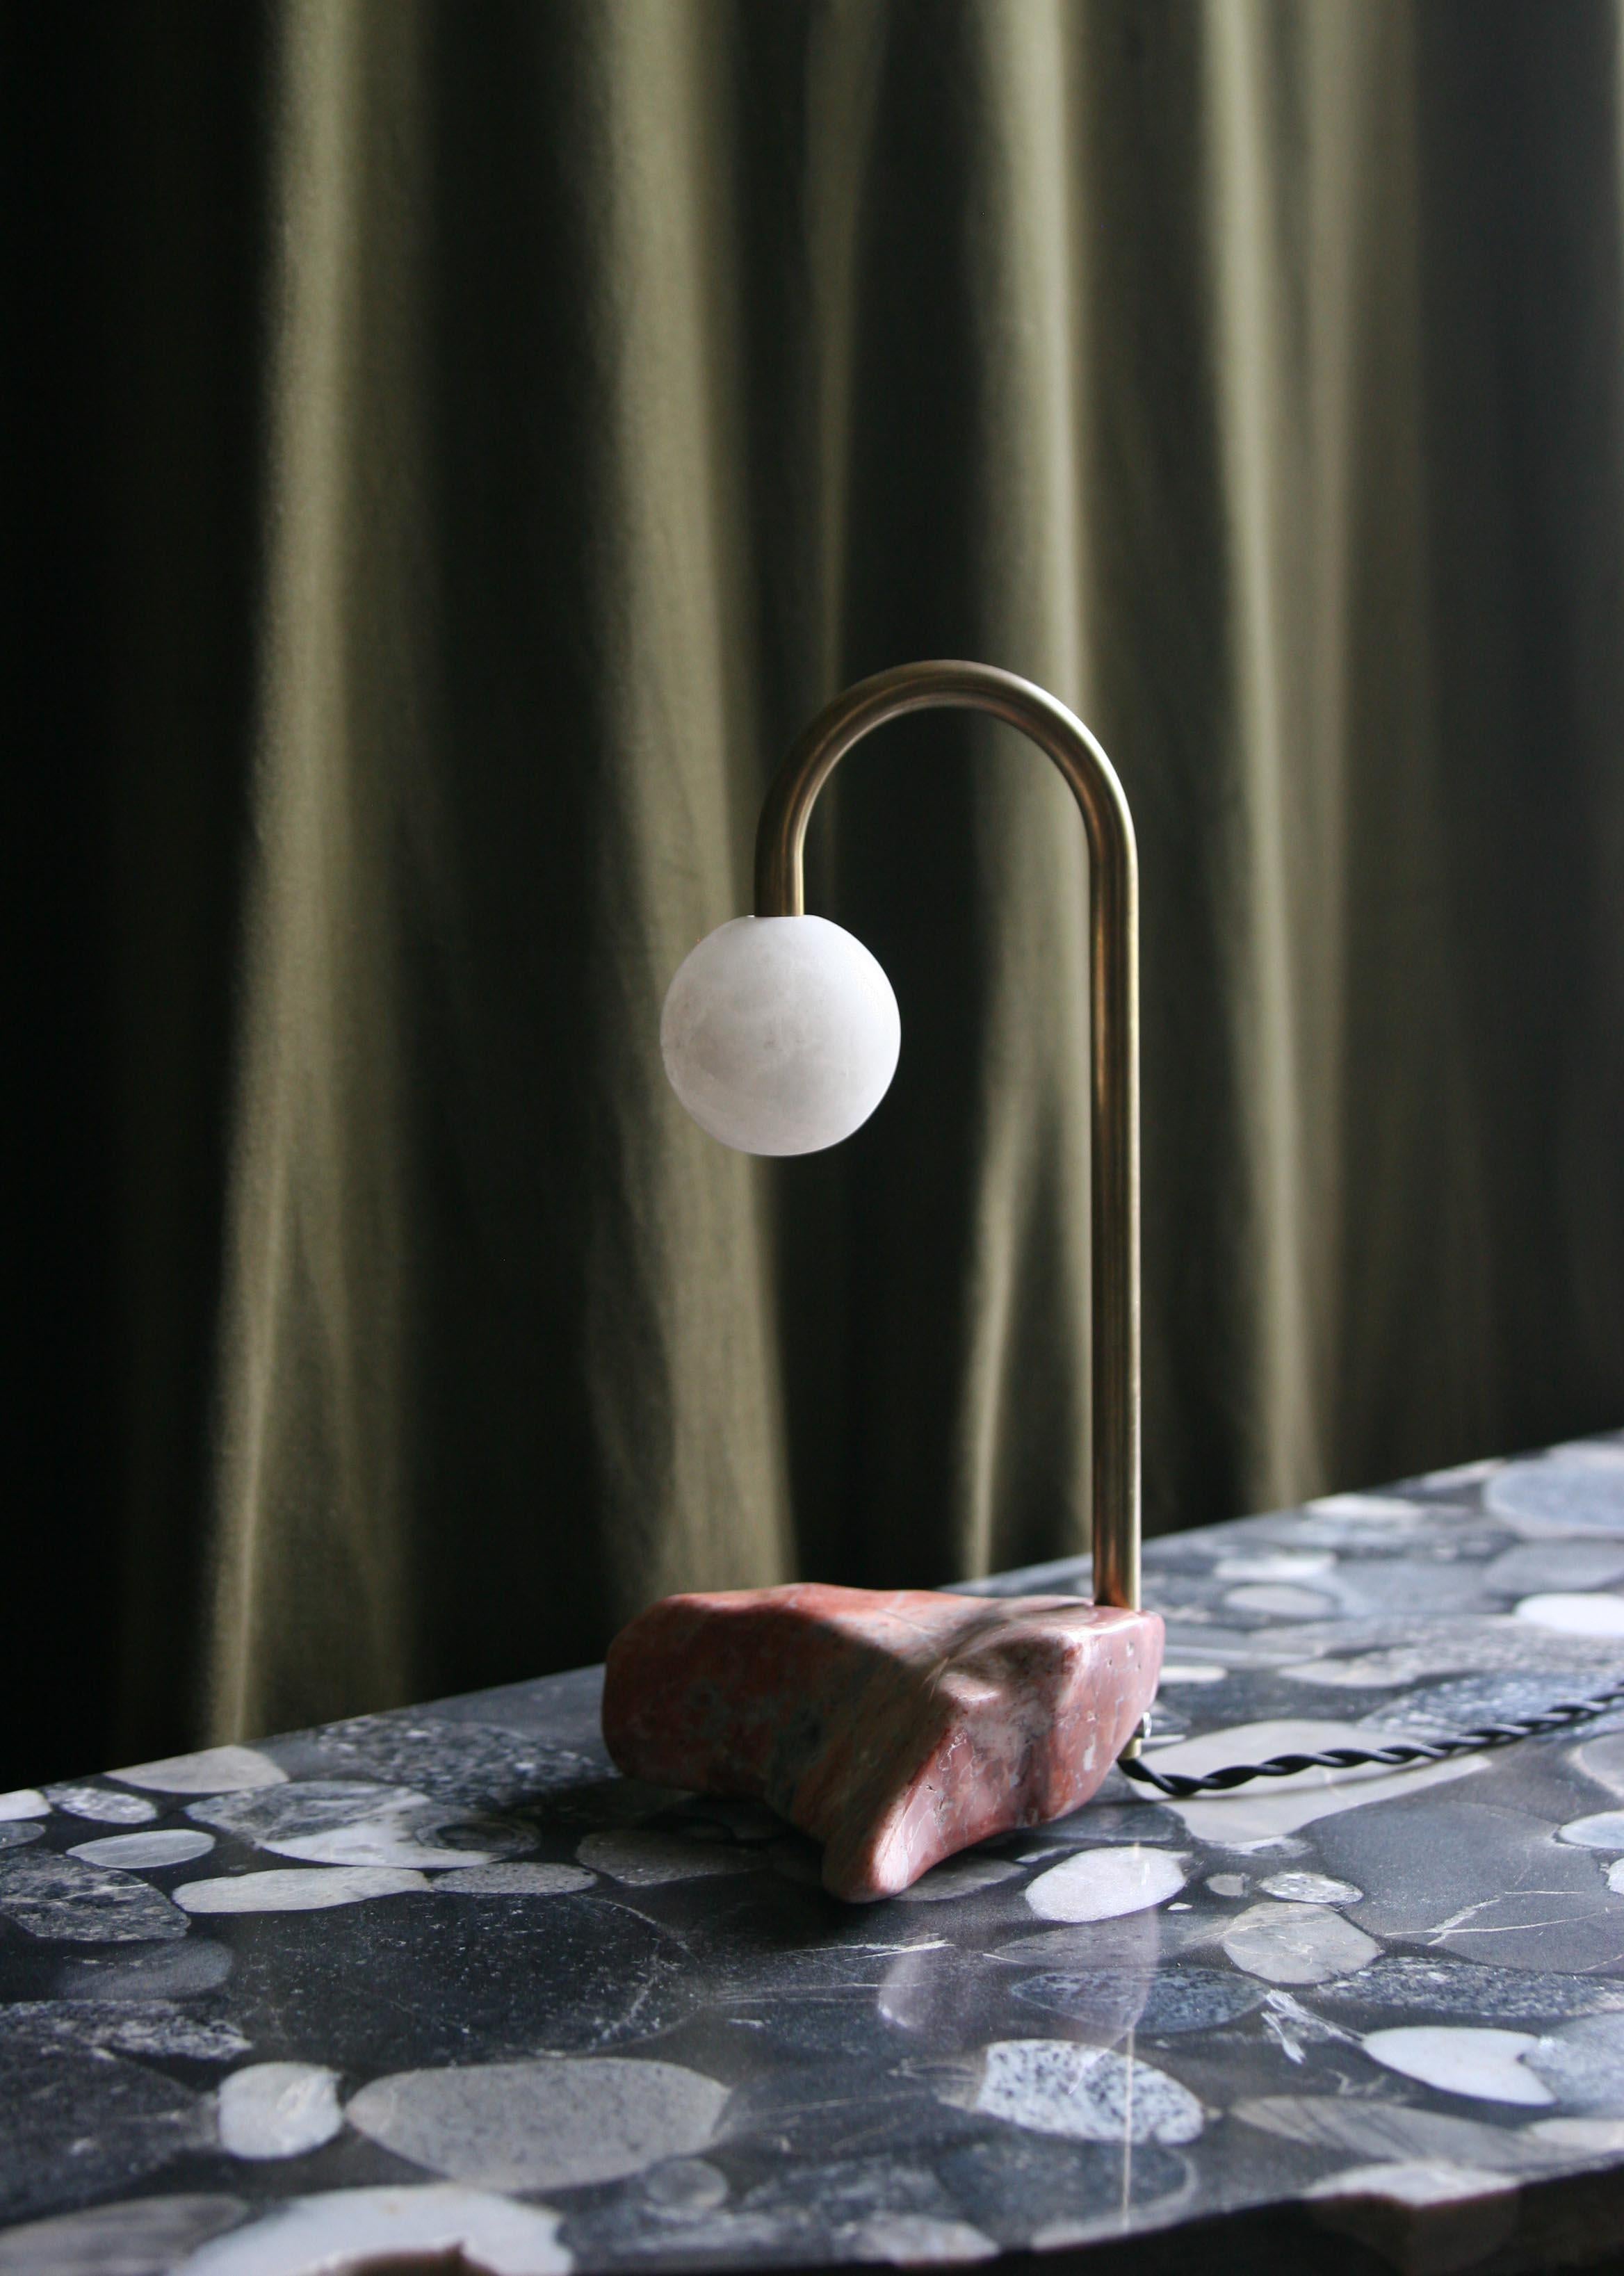 CL-oo cane lamp by Krzywda.
Dimensions: 19L x 16D x 30H cm.
Materials: Alabaster, brass, marble.
Each base is sculpted by hand and varies from piece to piece in shape, color and weight.

All lamps could be wired for each